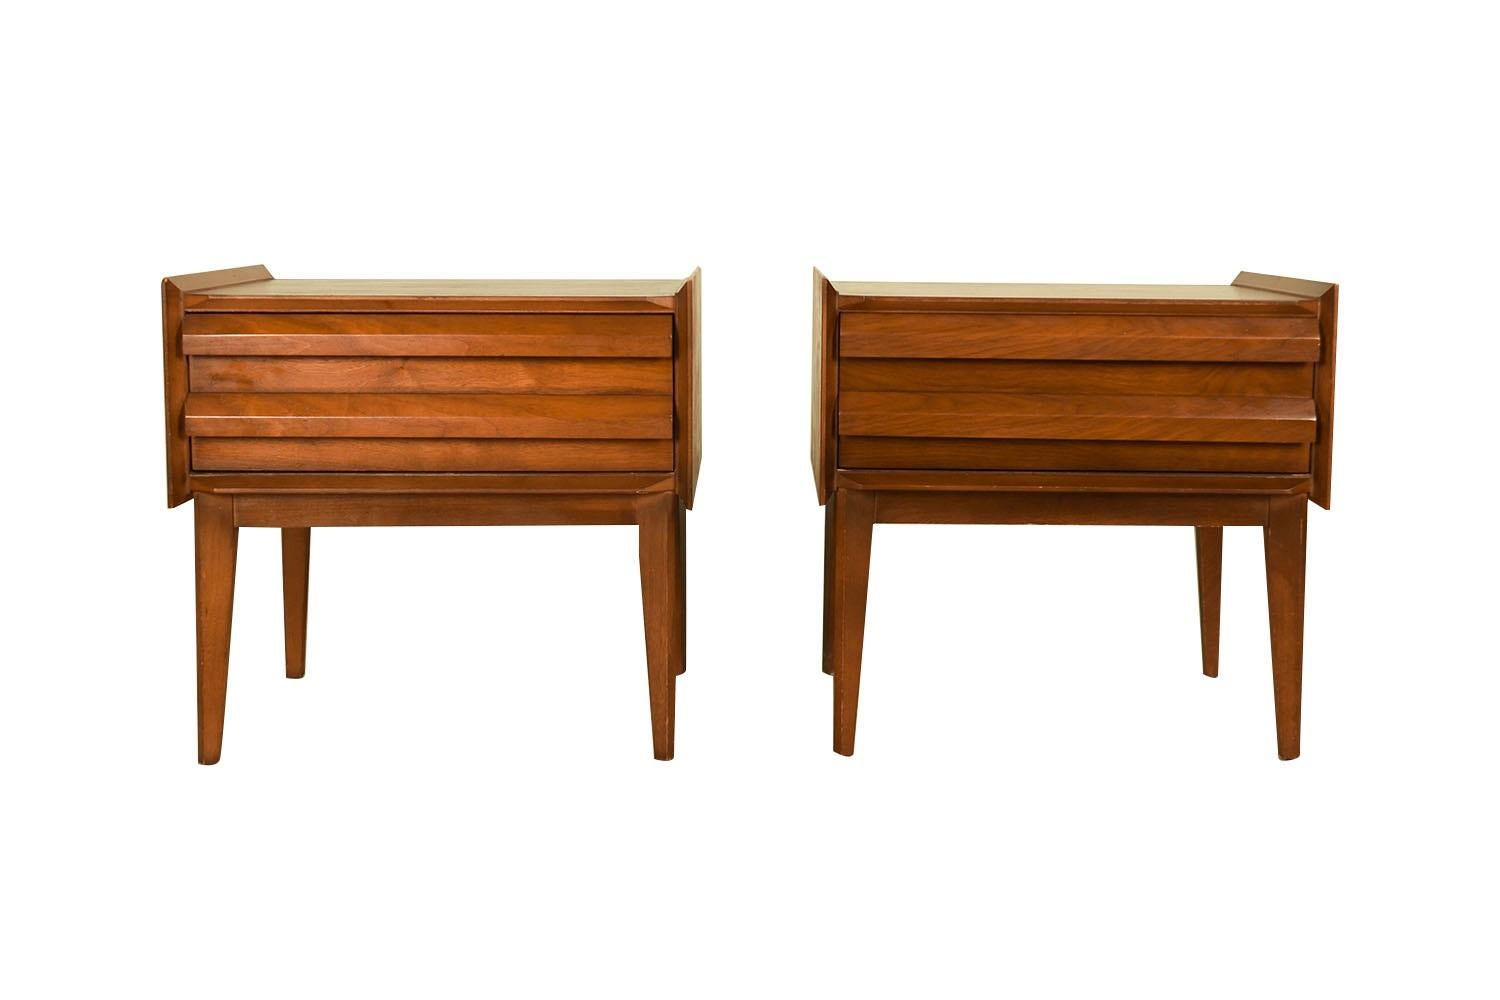 An elegant Mid Century Modern pair of nightstands/end tables designed by Andre Bus for the First Edition Collection by Lane c. 1960s. This is a beautiful example of Mid-Century craftsmanship by Lane Furniture. Each feature one deep drawer, with a